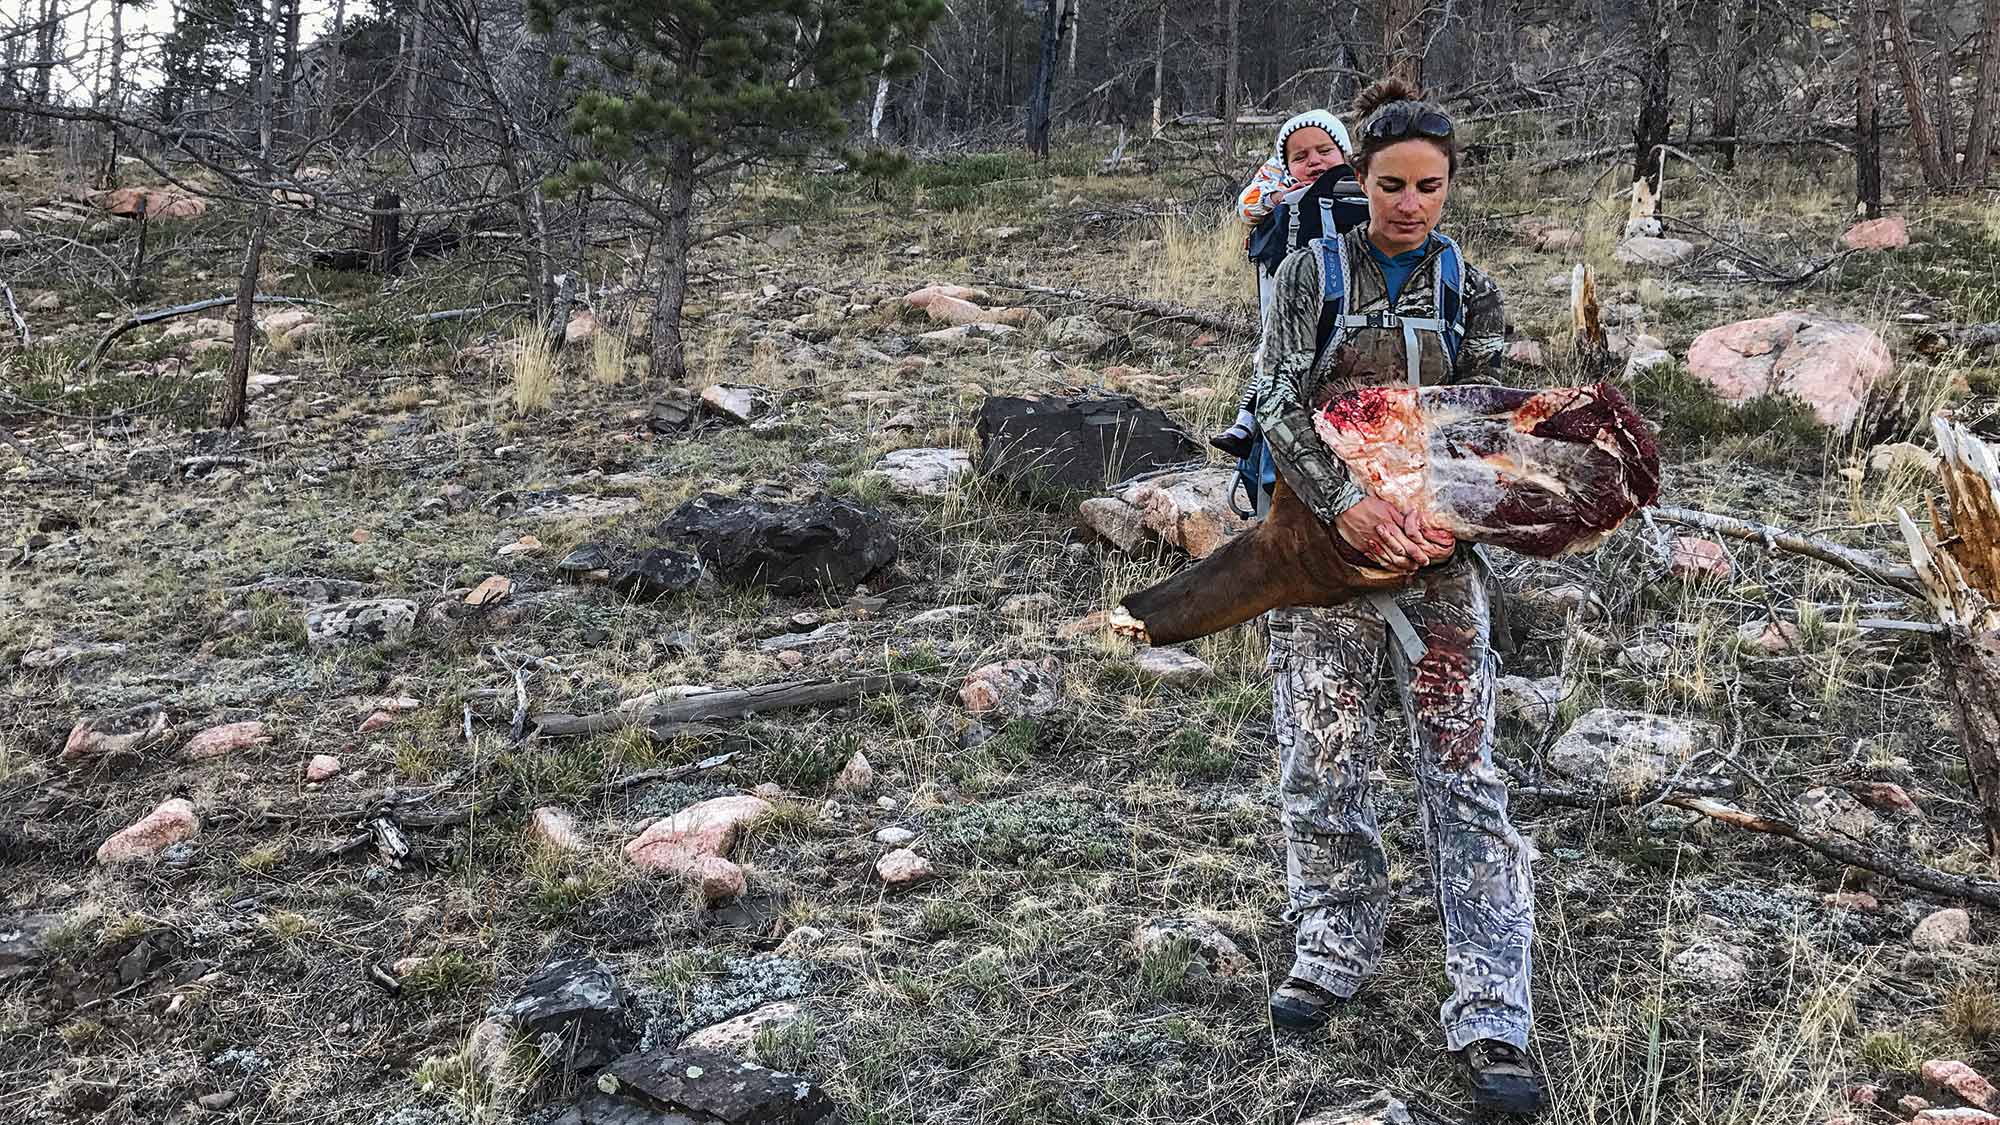 Hunter with baby in carrier on back also carries part of an elk through rocky, woody terrain.